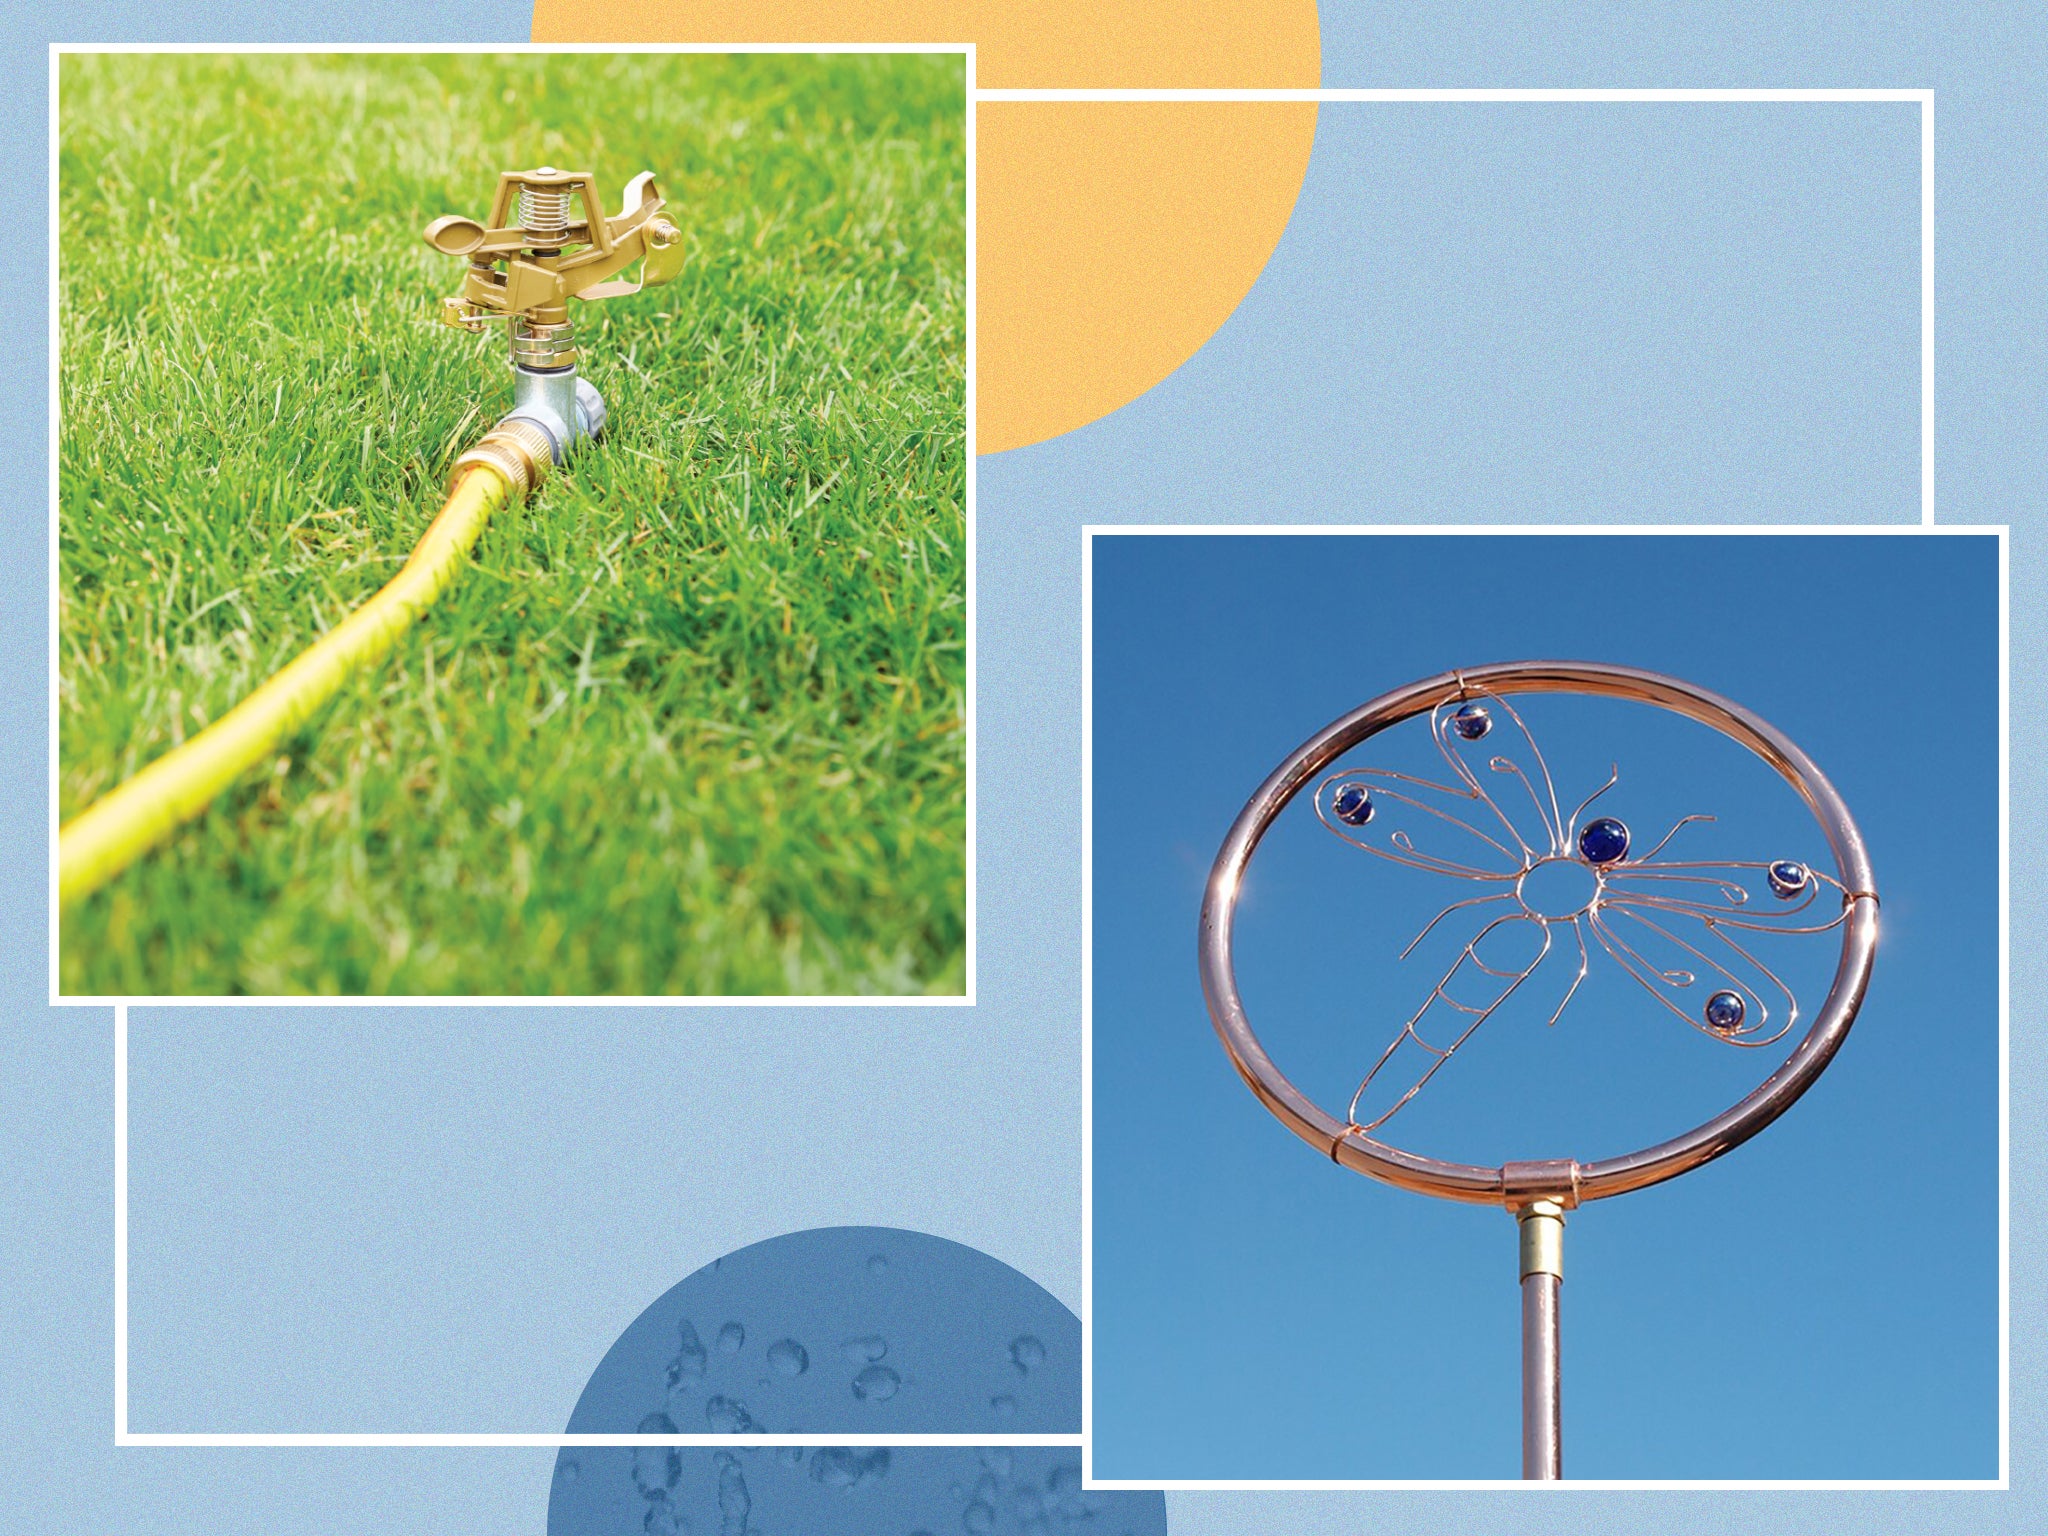 Lawn Watering Tips – Impact vs Oscillating Sprinkler Systems